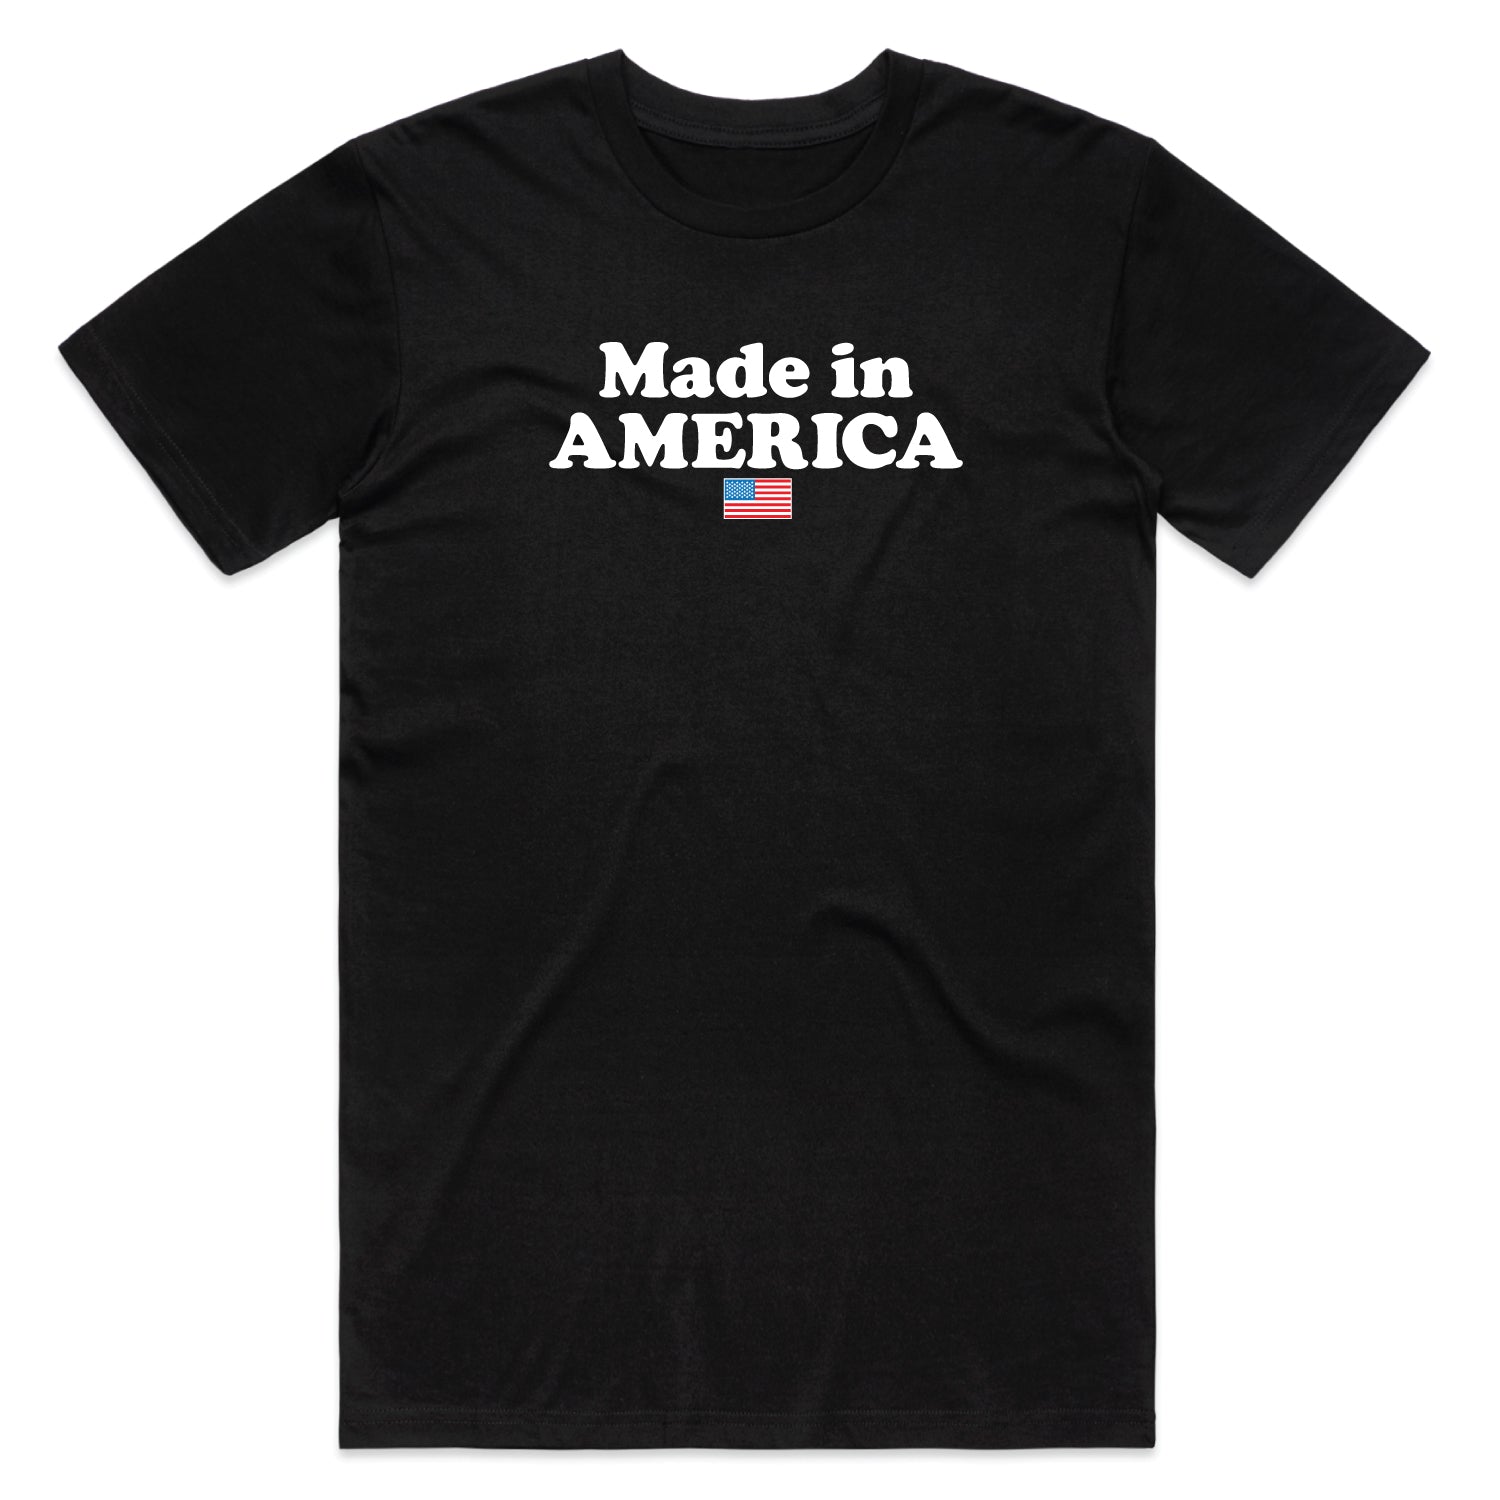 Made in America T-shirt